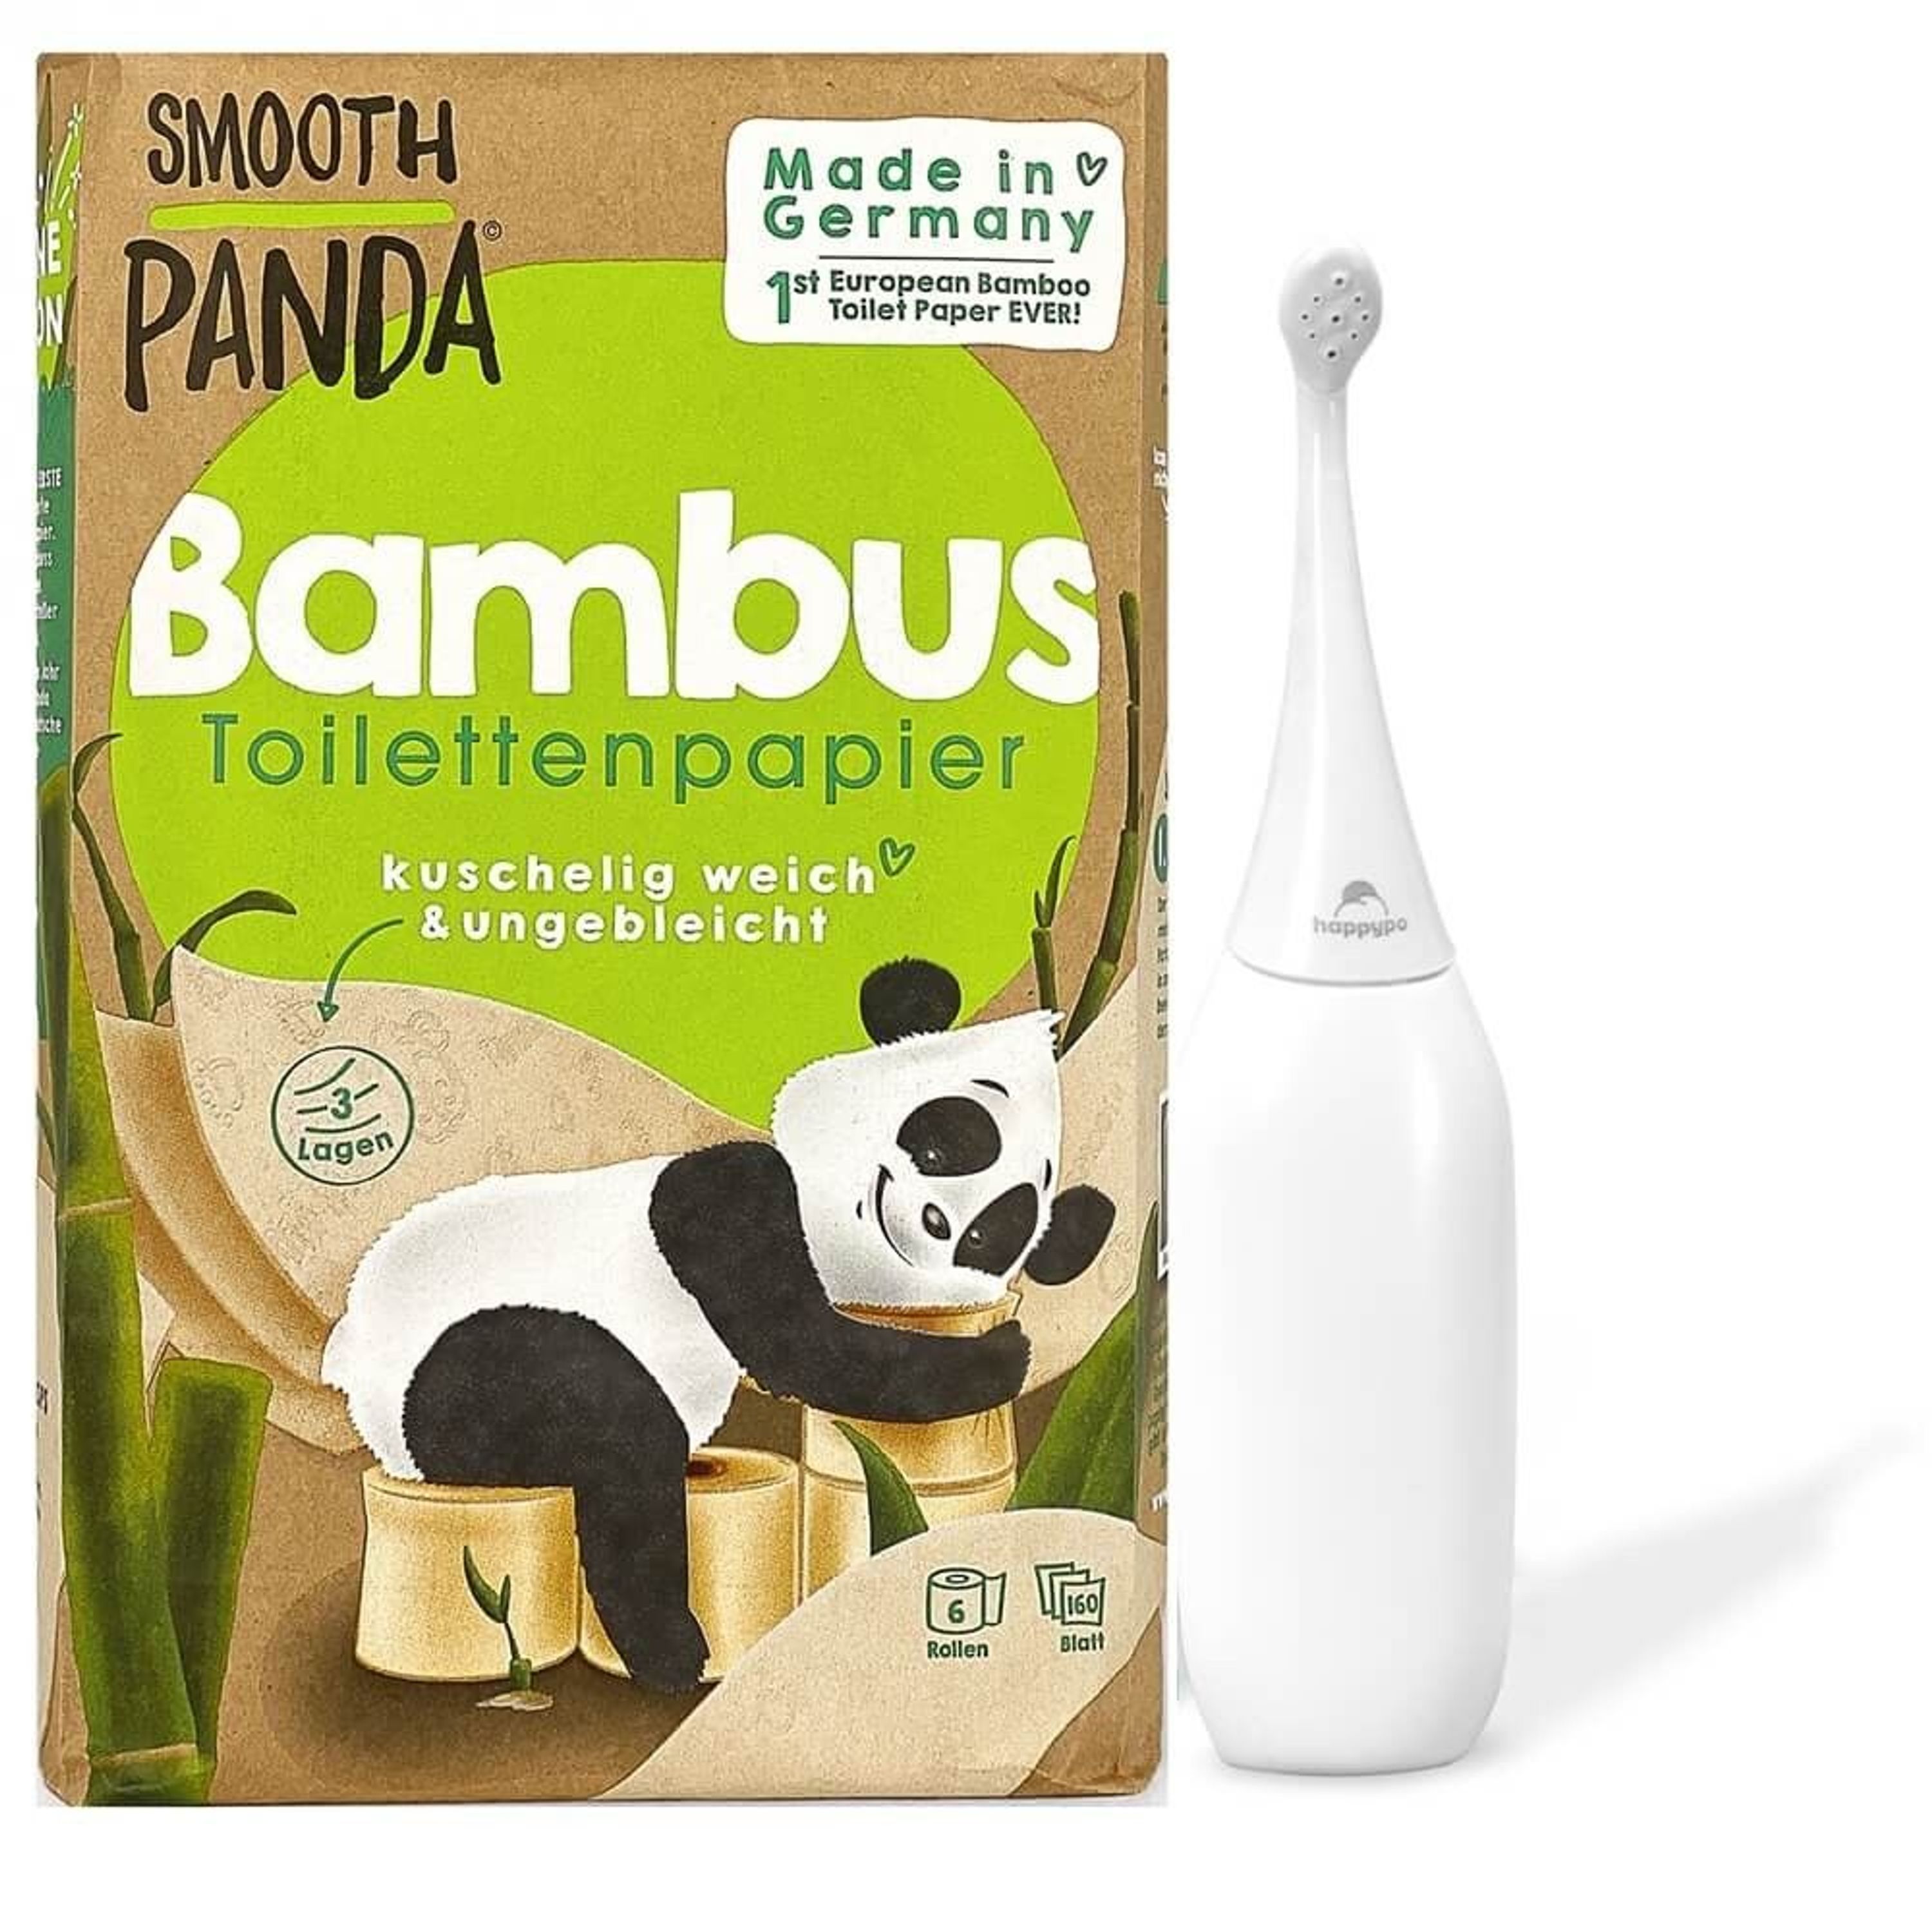 Set of Smooth Panda bamboo toilet paper (6 rolls) and HappyPo butt shower.